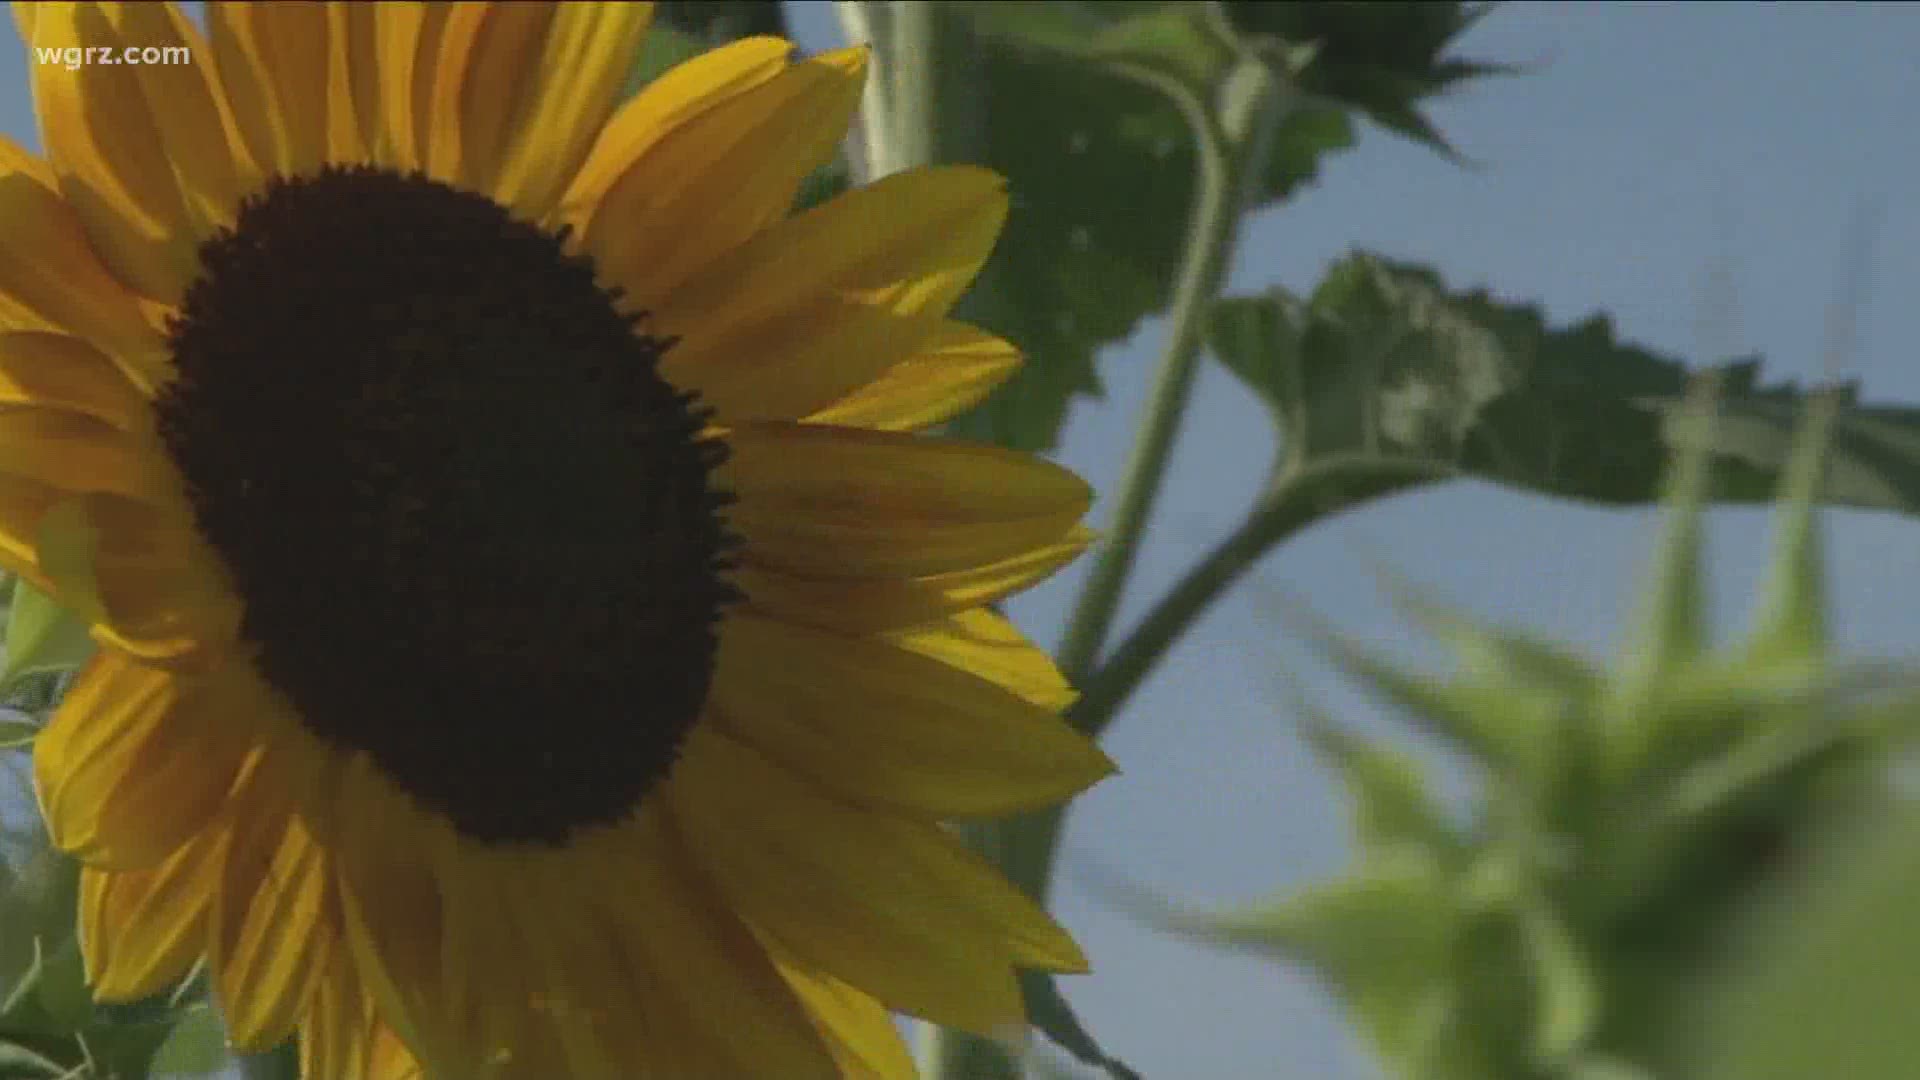 Sunflowers of Sanborn opens this Saturday